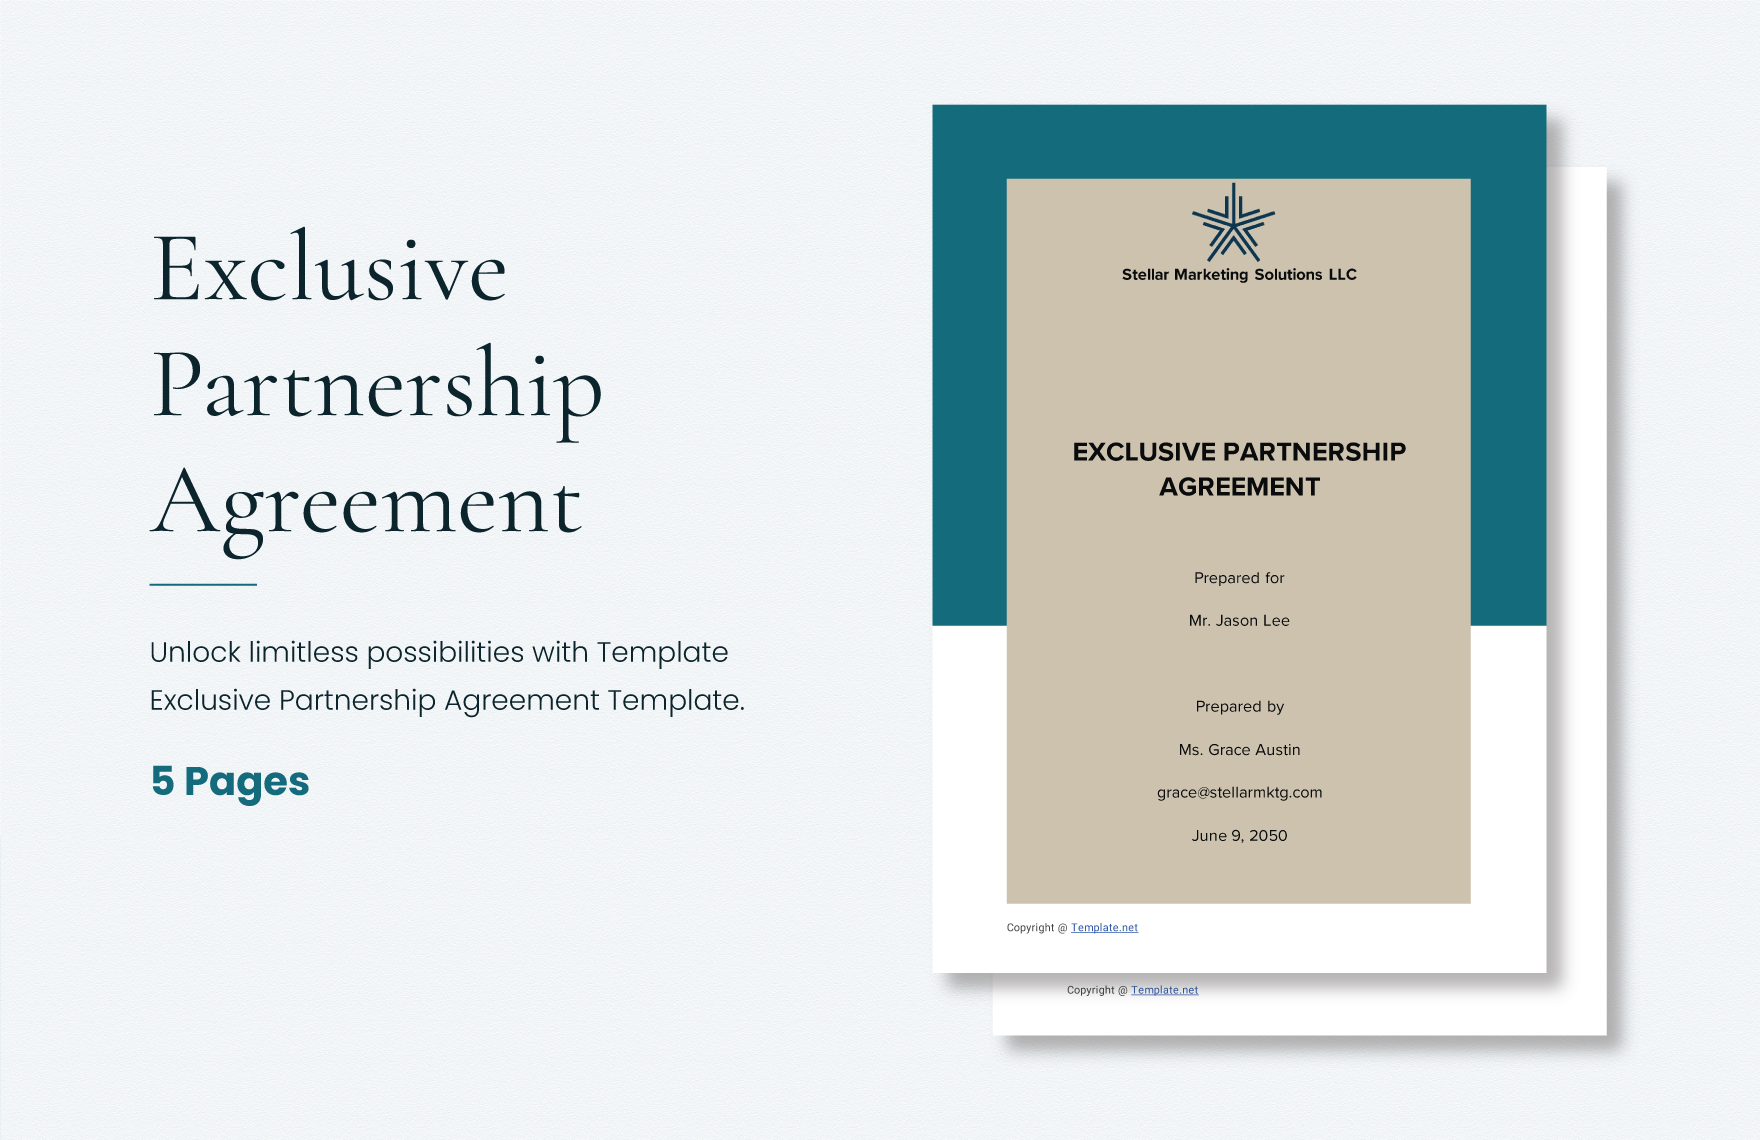 Exclusive Partnership Agreement Template